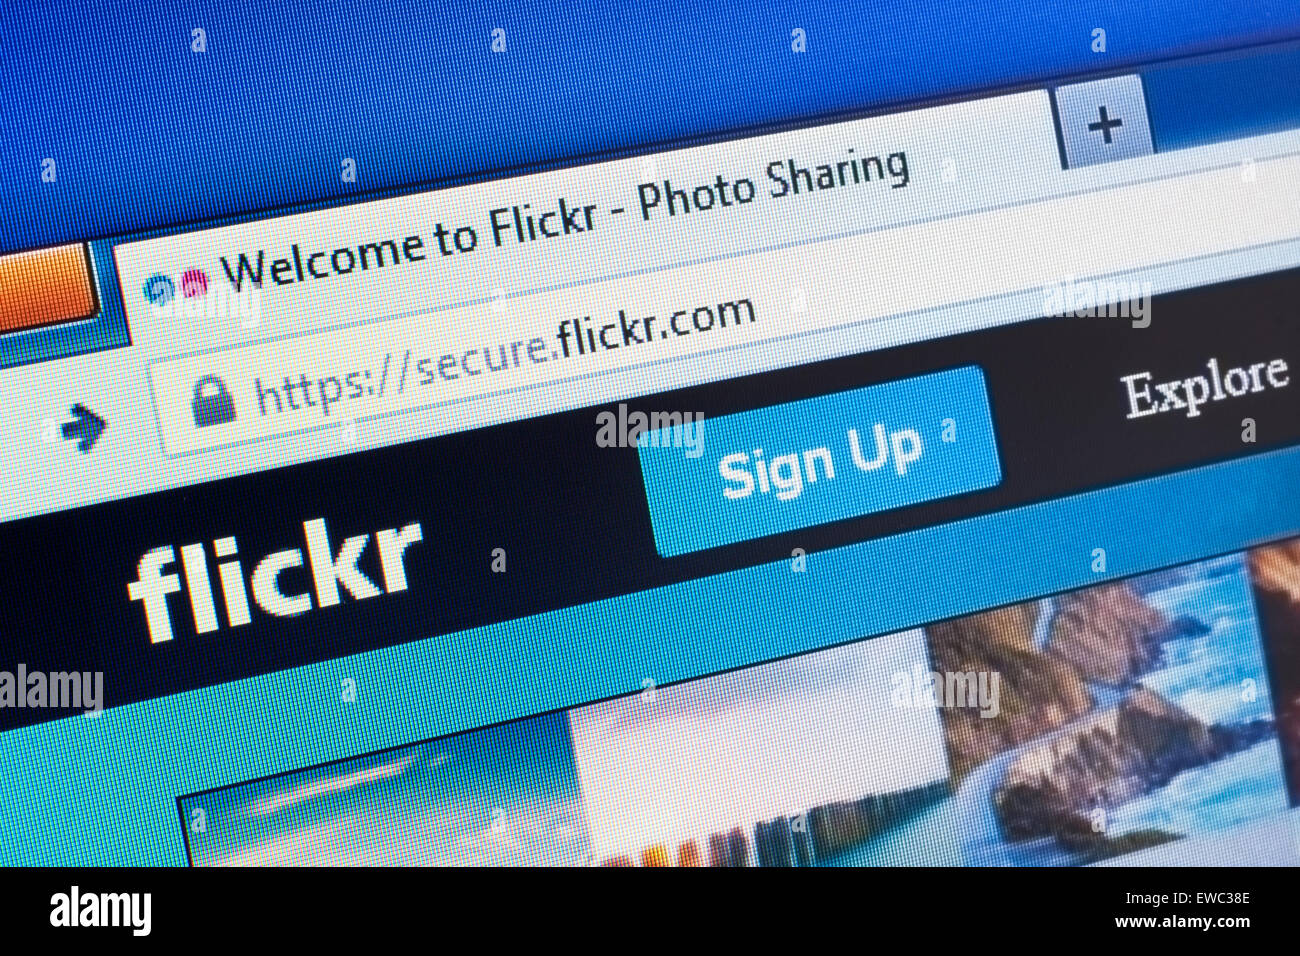 GDANSK, POLAND - APRIL 09, 2015.Flickr homepage on the computer screen. Flickr is an image hosting and video hosting website Stock Photo